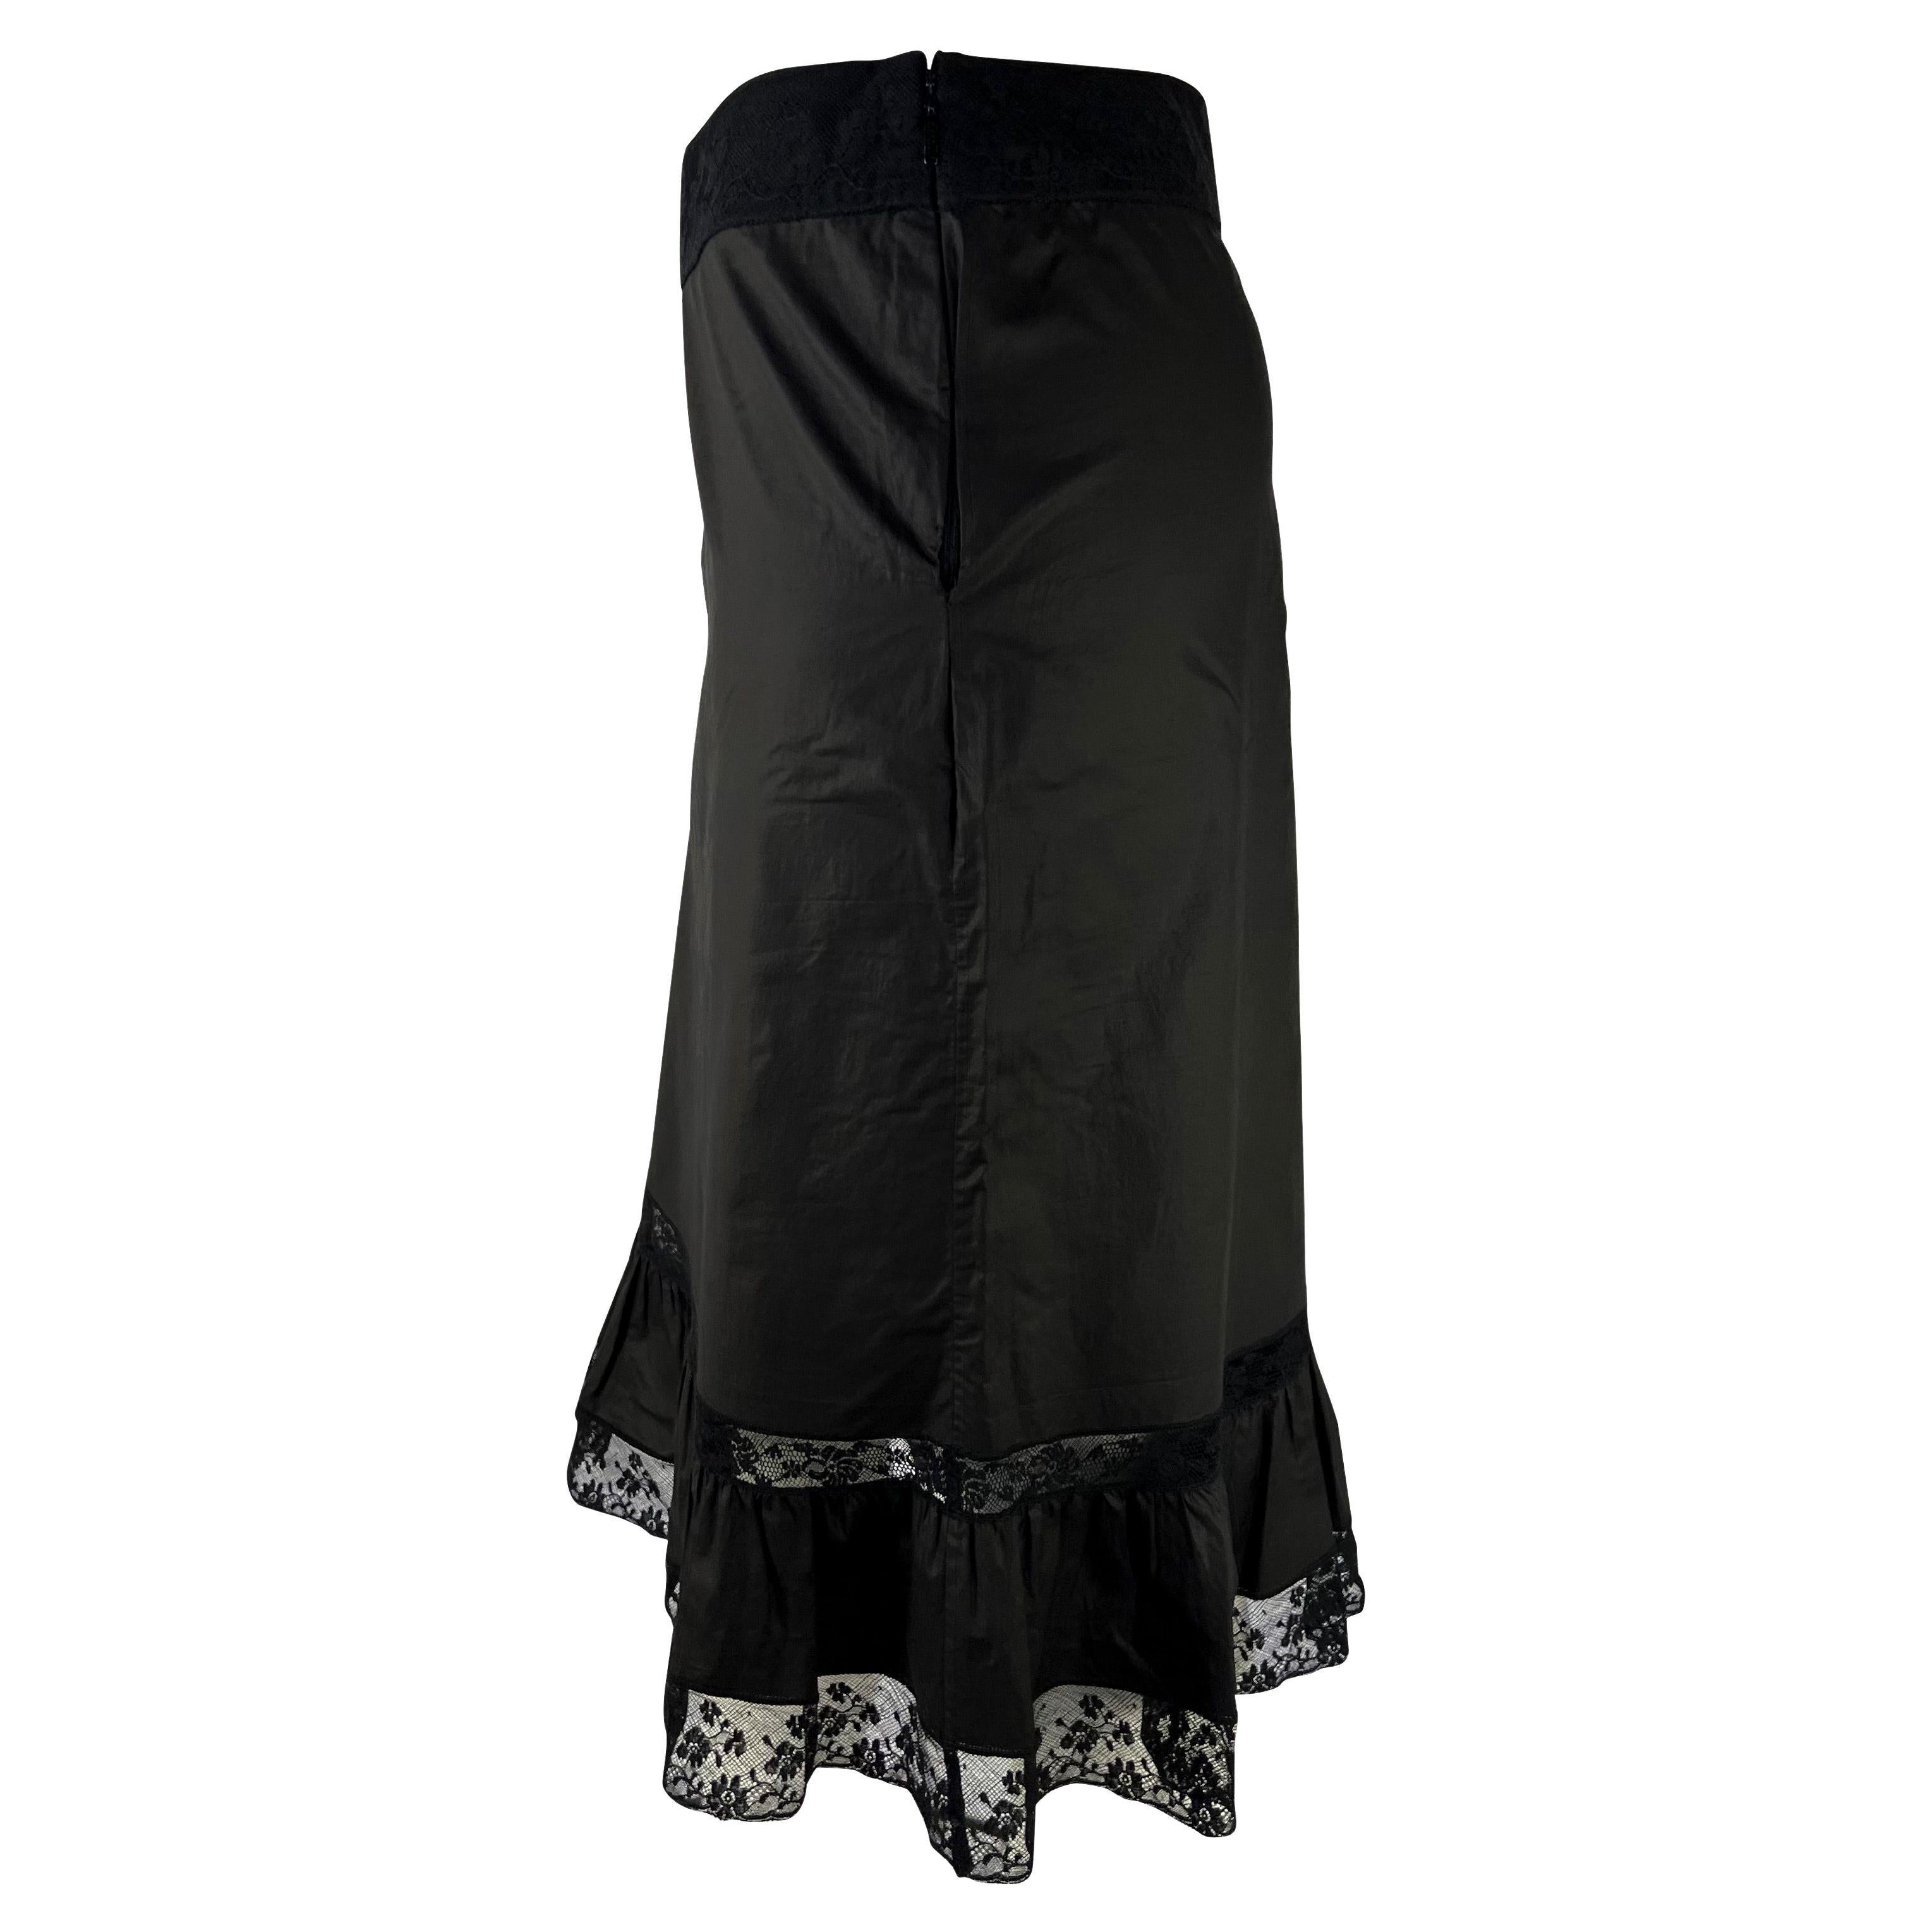 S/S 2002 Gucci by Tom Ford Cotton Black Lace Trim Ruffle Skirt In Excellent Condition For Sale In West Hollywood, CA